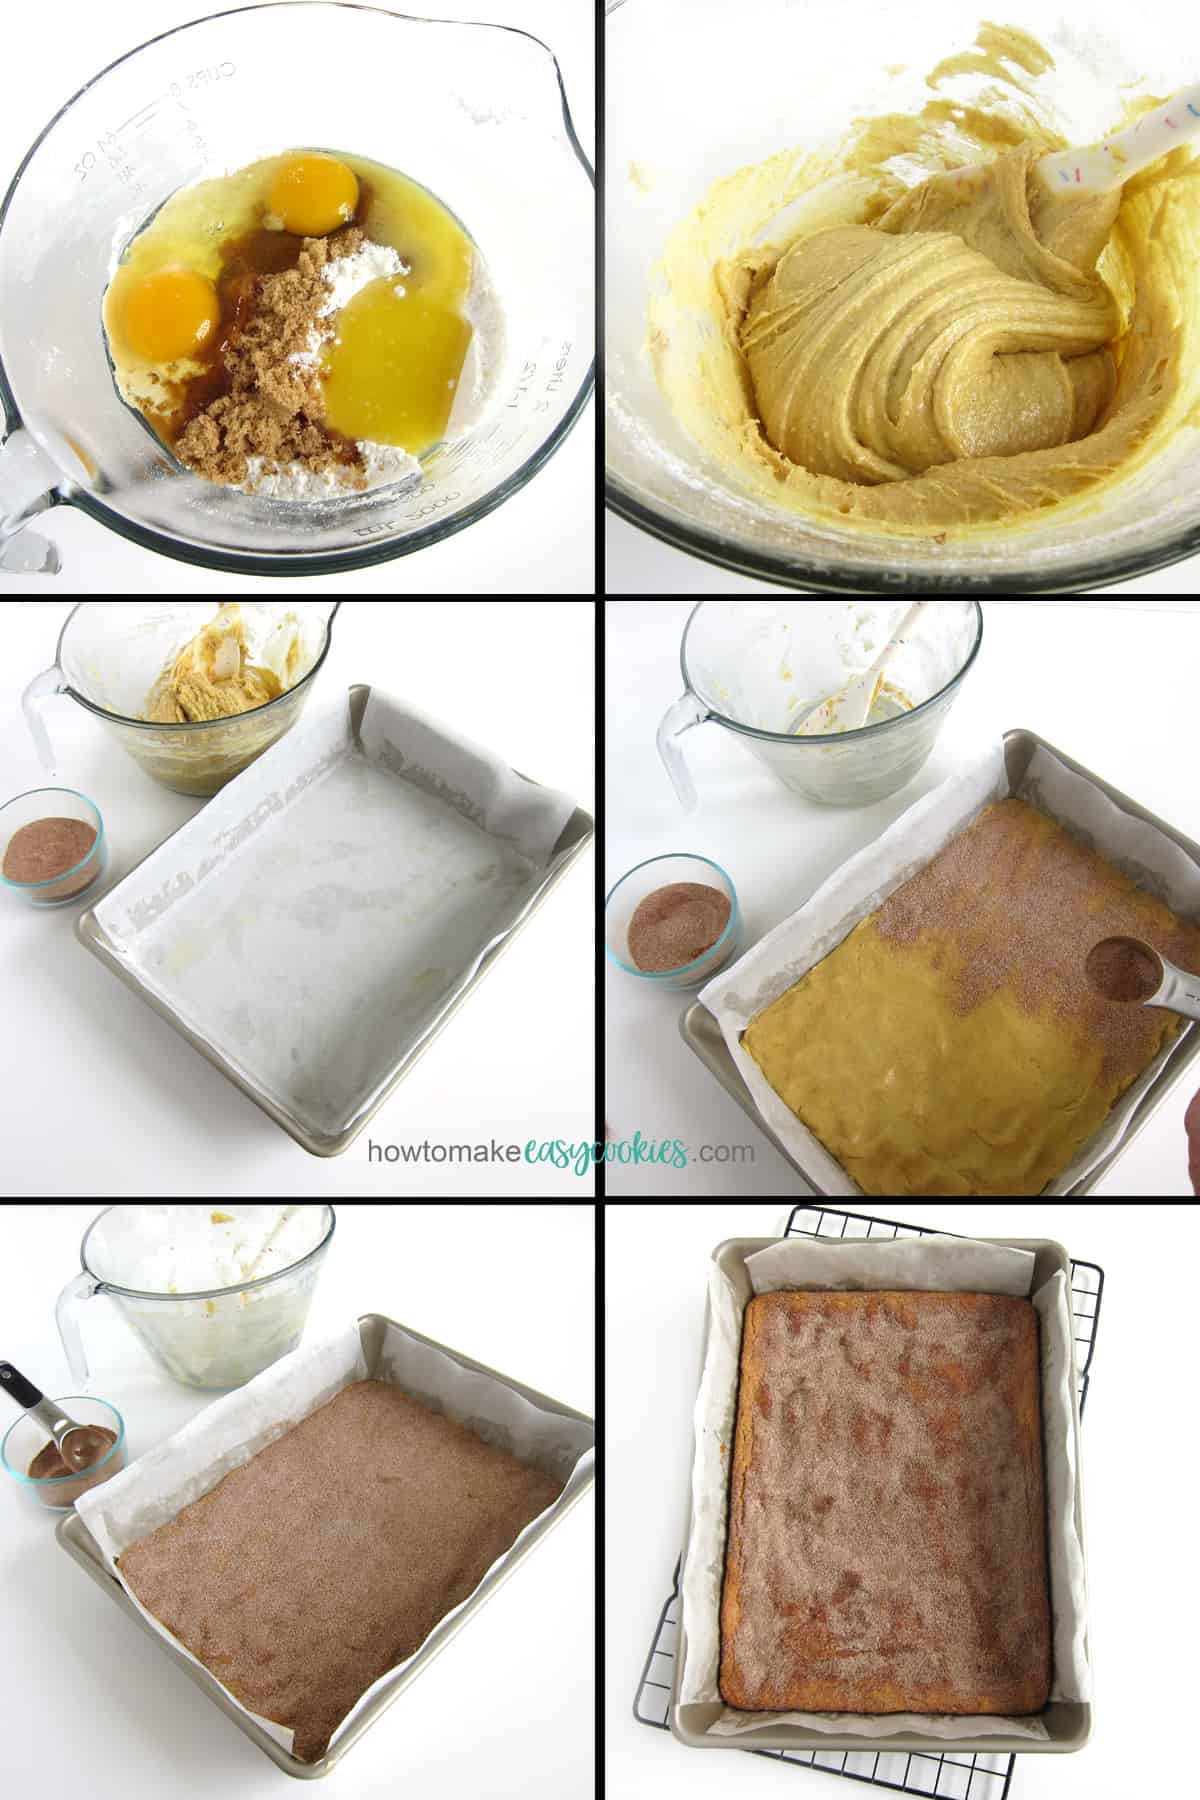 mix cake mix, brown sugar, cinnamon, eggs, and melted butter, then spread into pan and top with cinnamon sugar